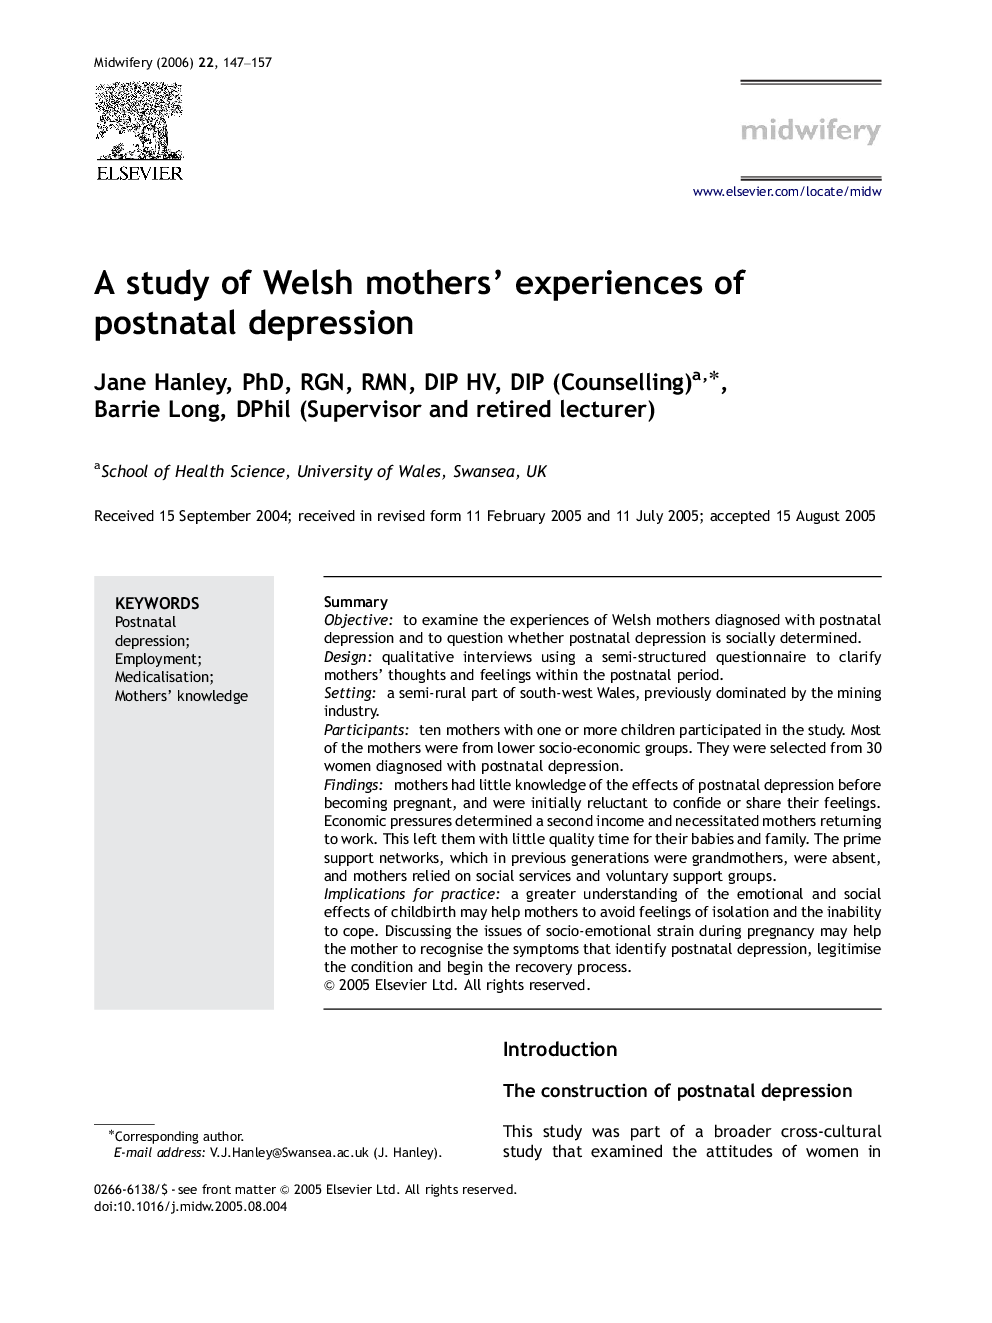 A study of Welsh mothers’ experiences of postnatal depression